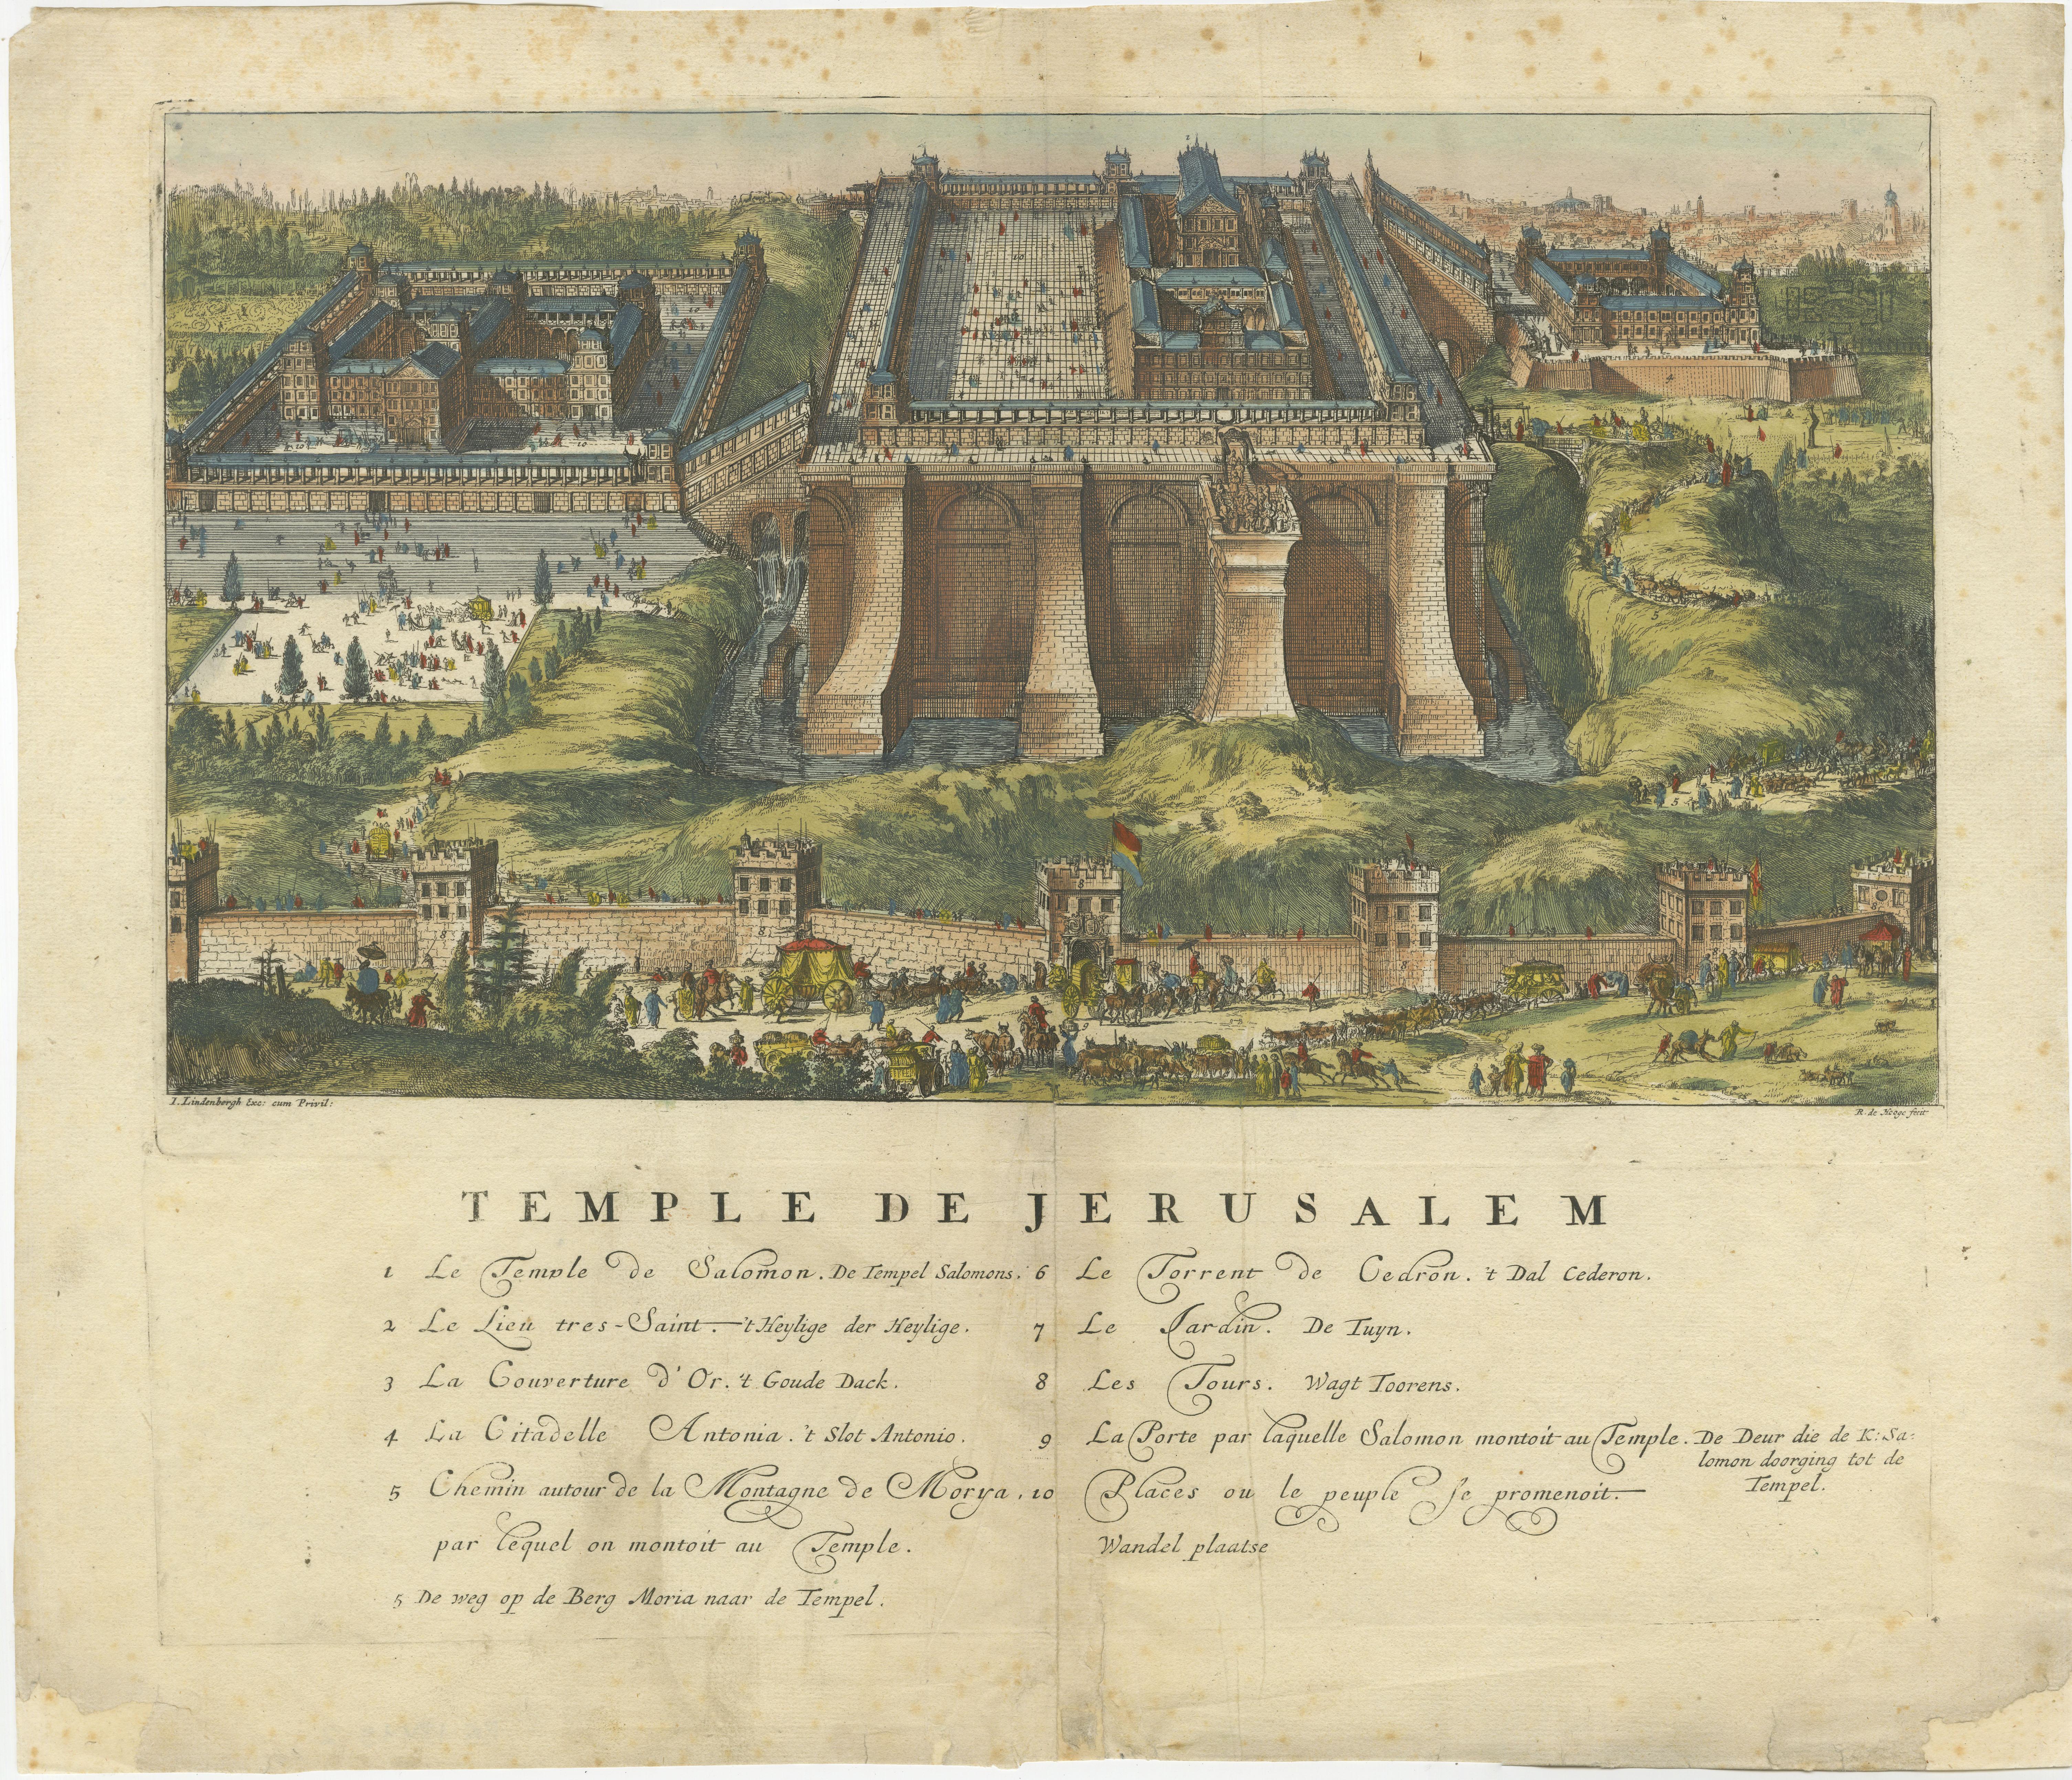 Antique print titled 'Temple de Jerusalem.' It's an original depiction of the Temple of Jerusalem, featuring intricate details and a legend describing various aspects, including Solomon's Temple, the garden, and more. This particular print was